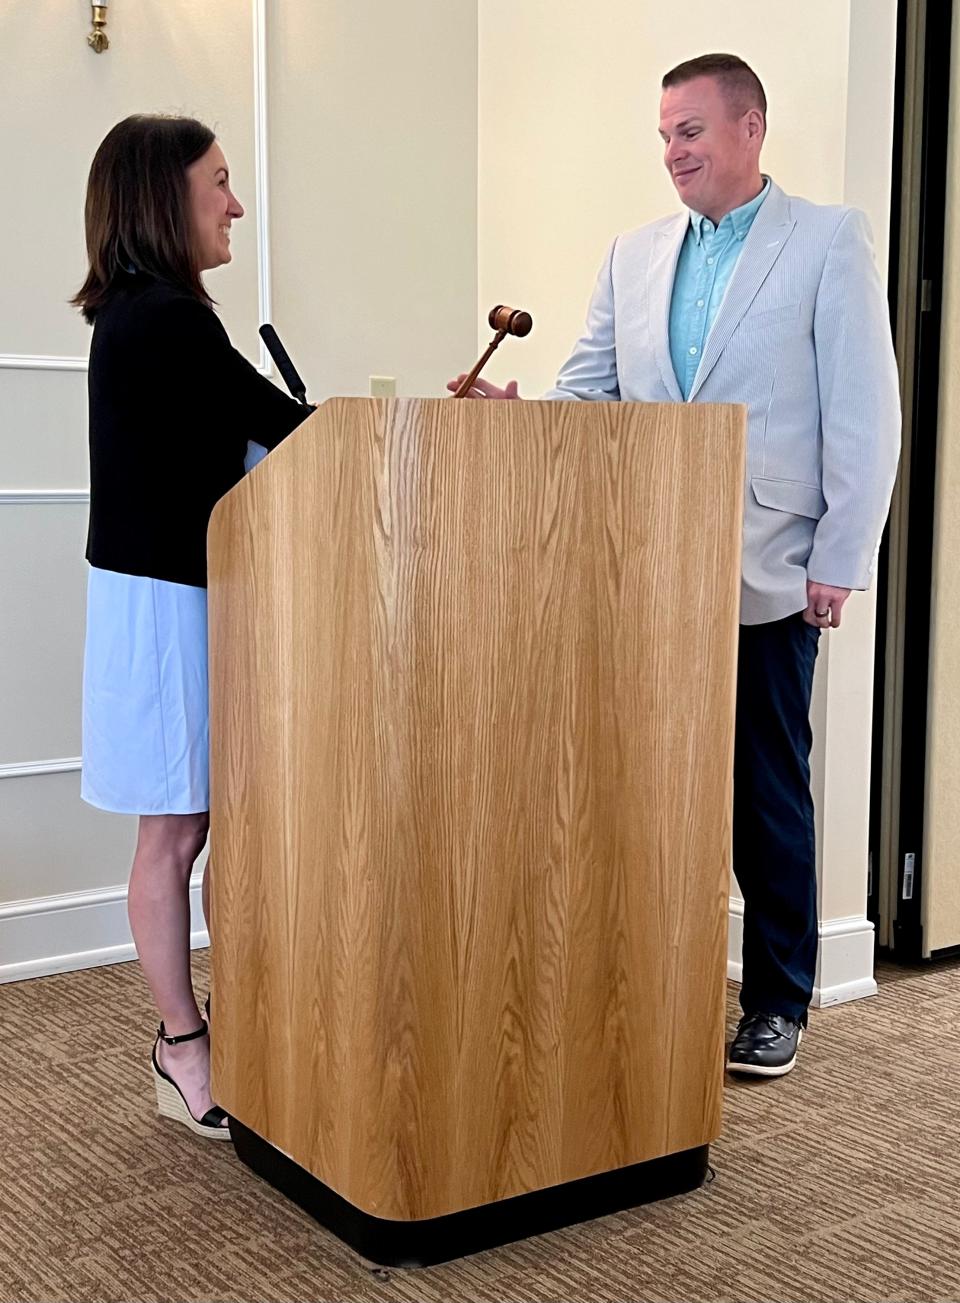 Board Chairwoman Jessica Gribben hands over the gavel to incoming Chairman Chris Hiner during the Richland County Foundation's annual meeting.